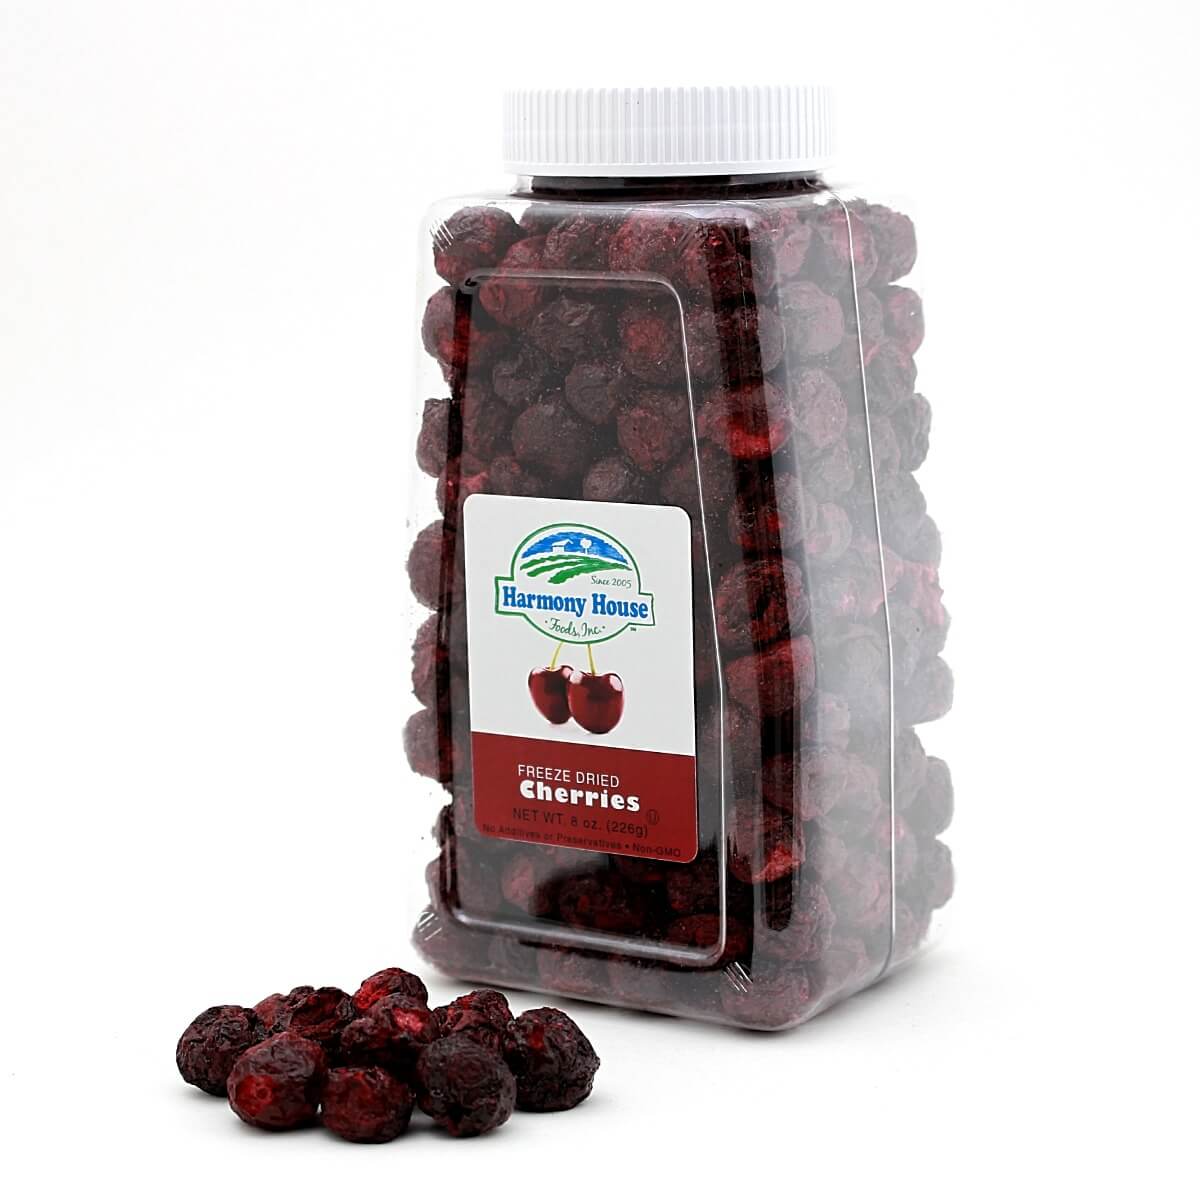 Cranberries in a jar on a white background, Harmony House freeze dried cherries.